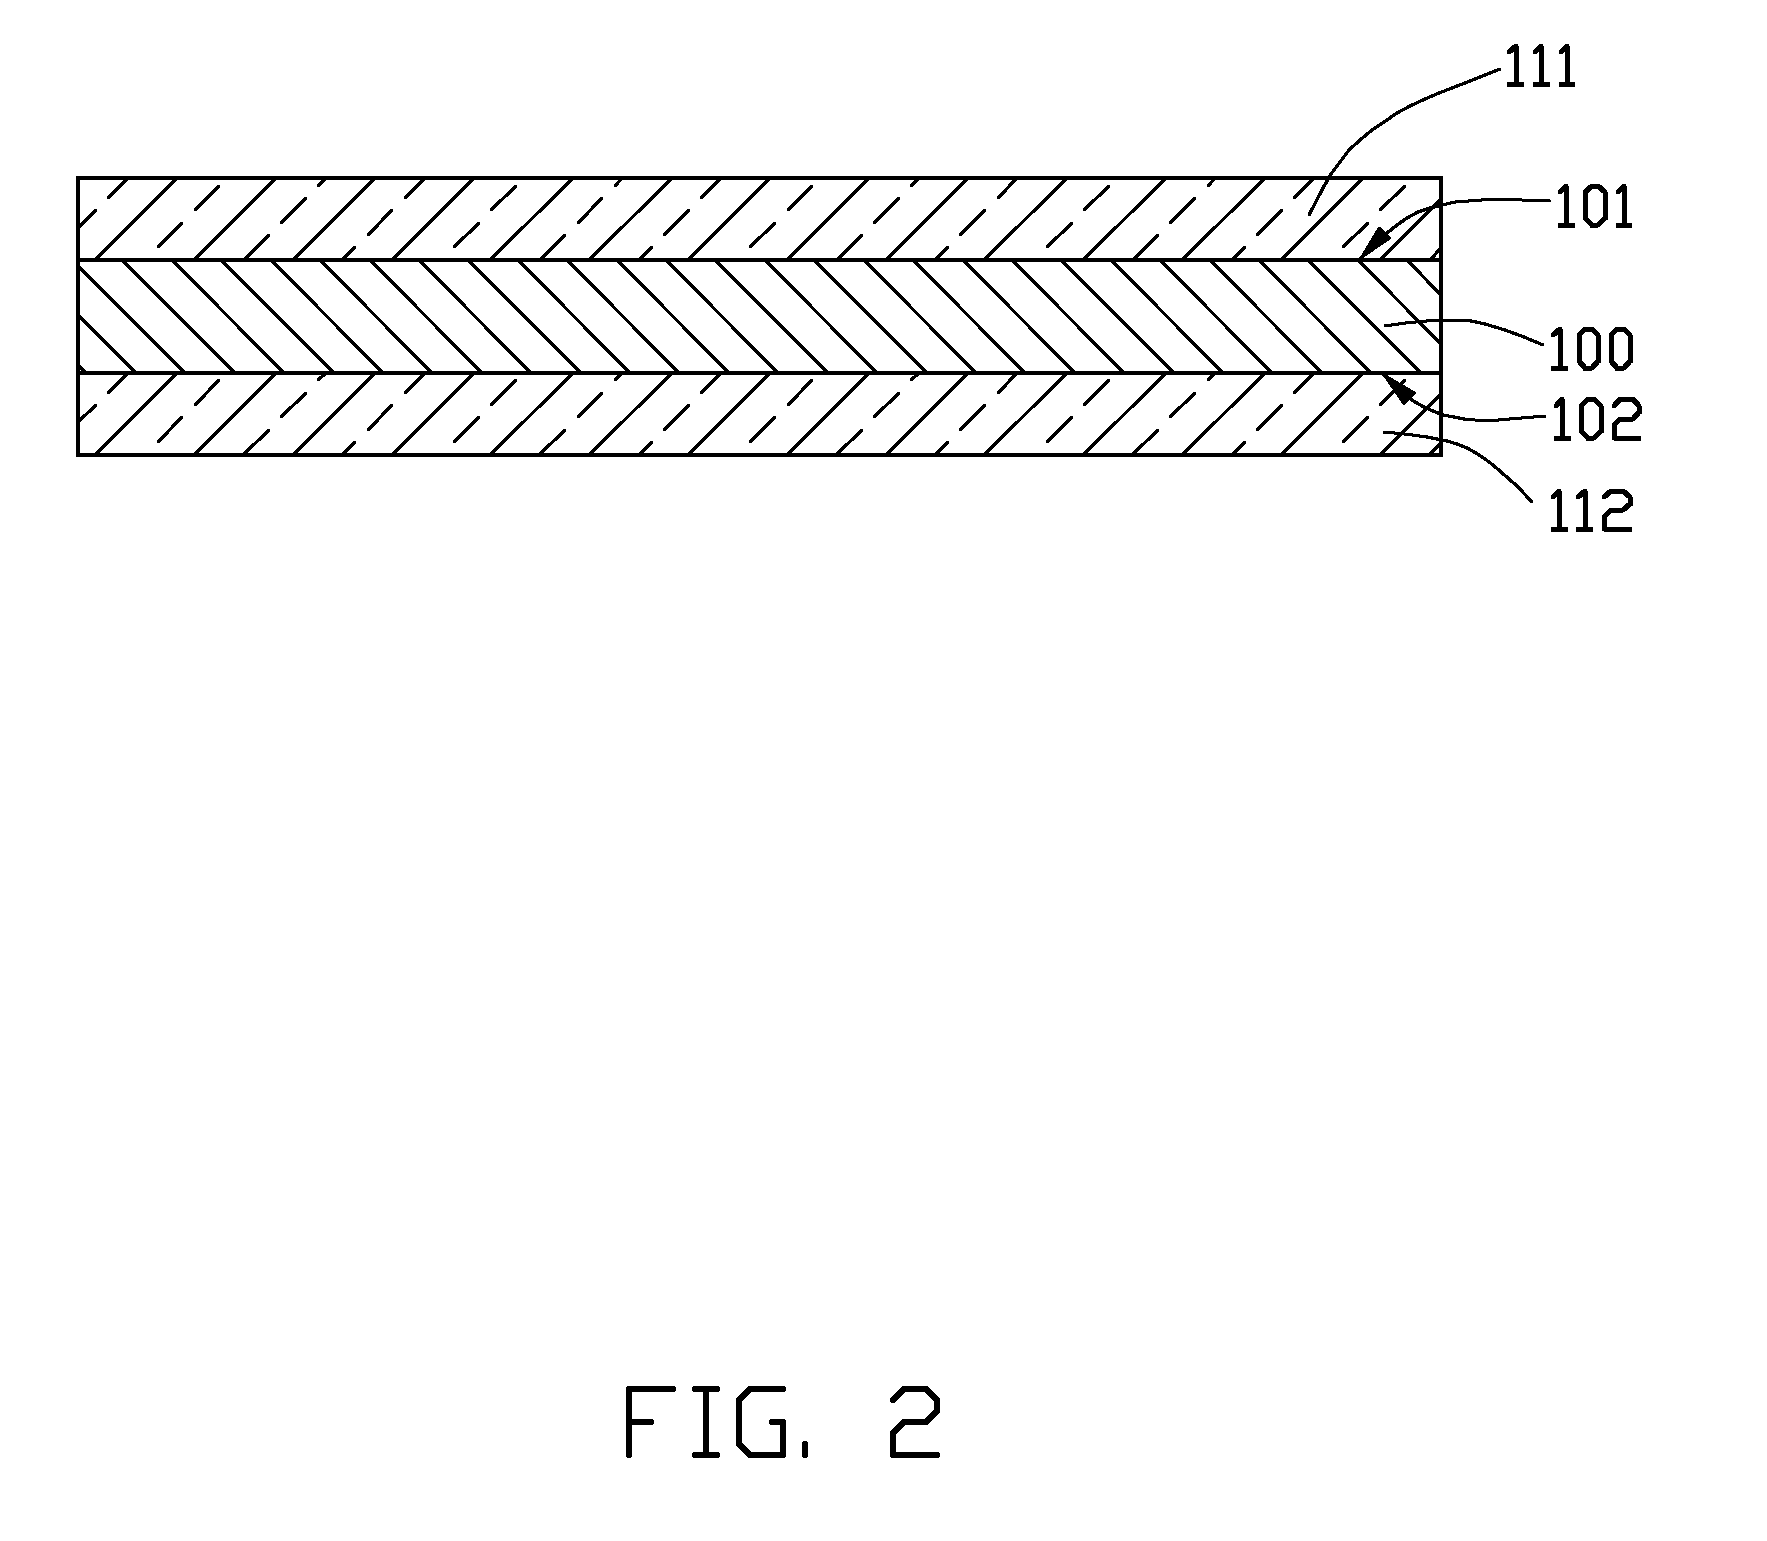 Method for manufacturing mechanical shutter blades using beryllium-copper alloy substrate